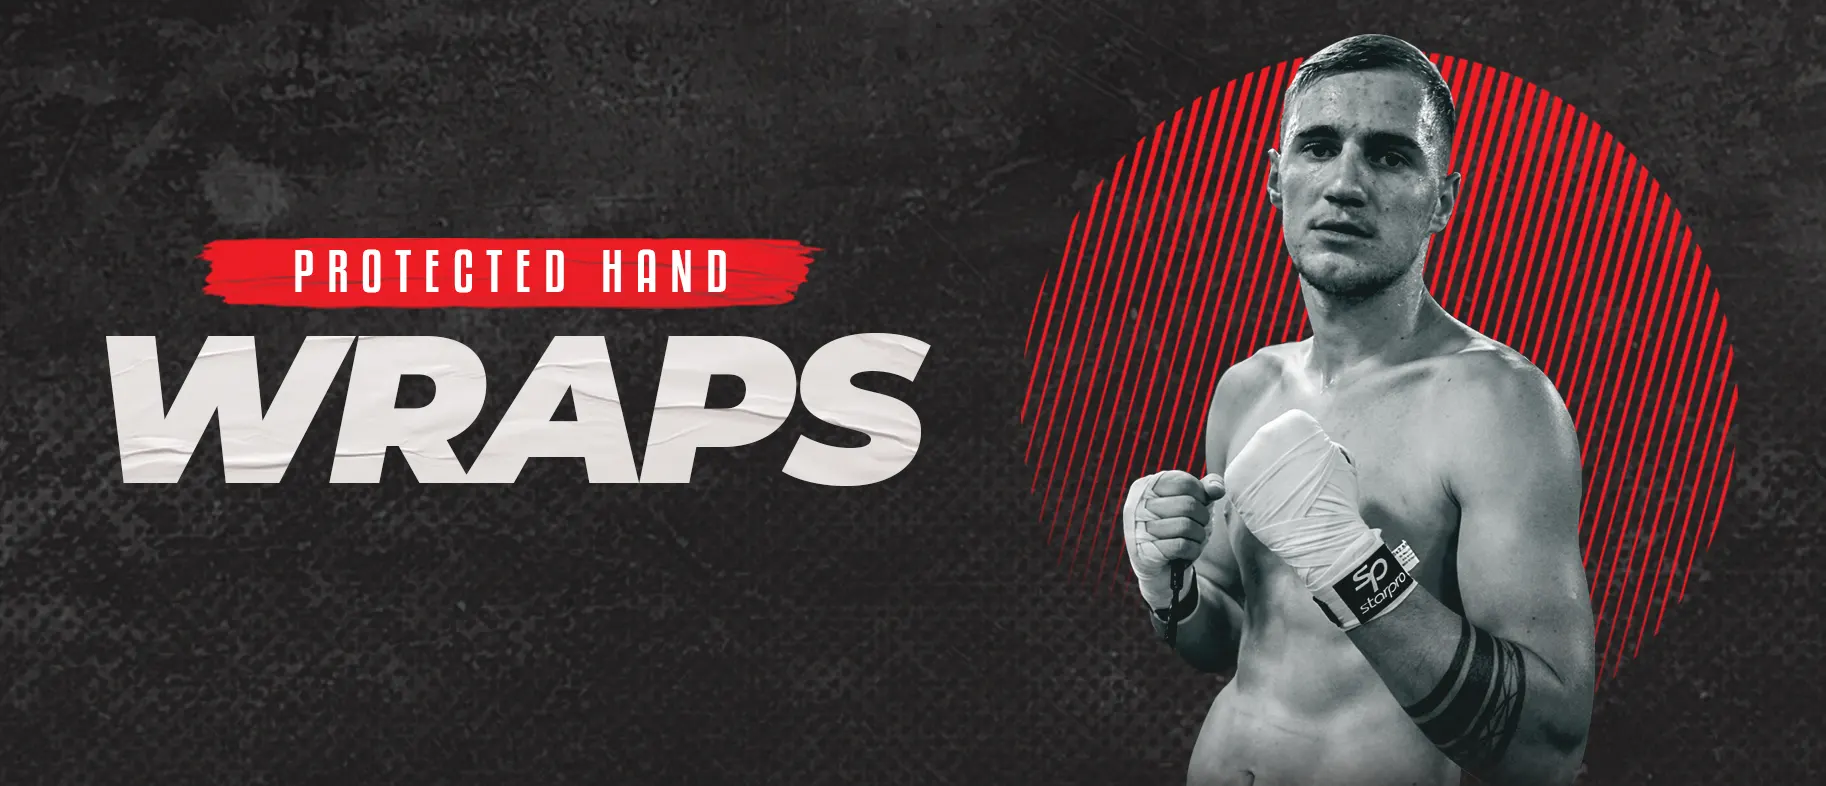 boxing hand wraps to protect your hands | StarPro